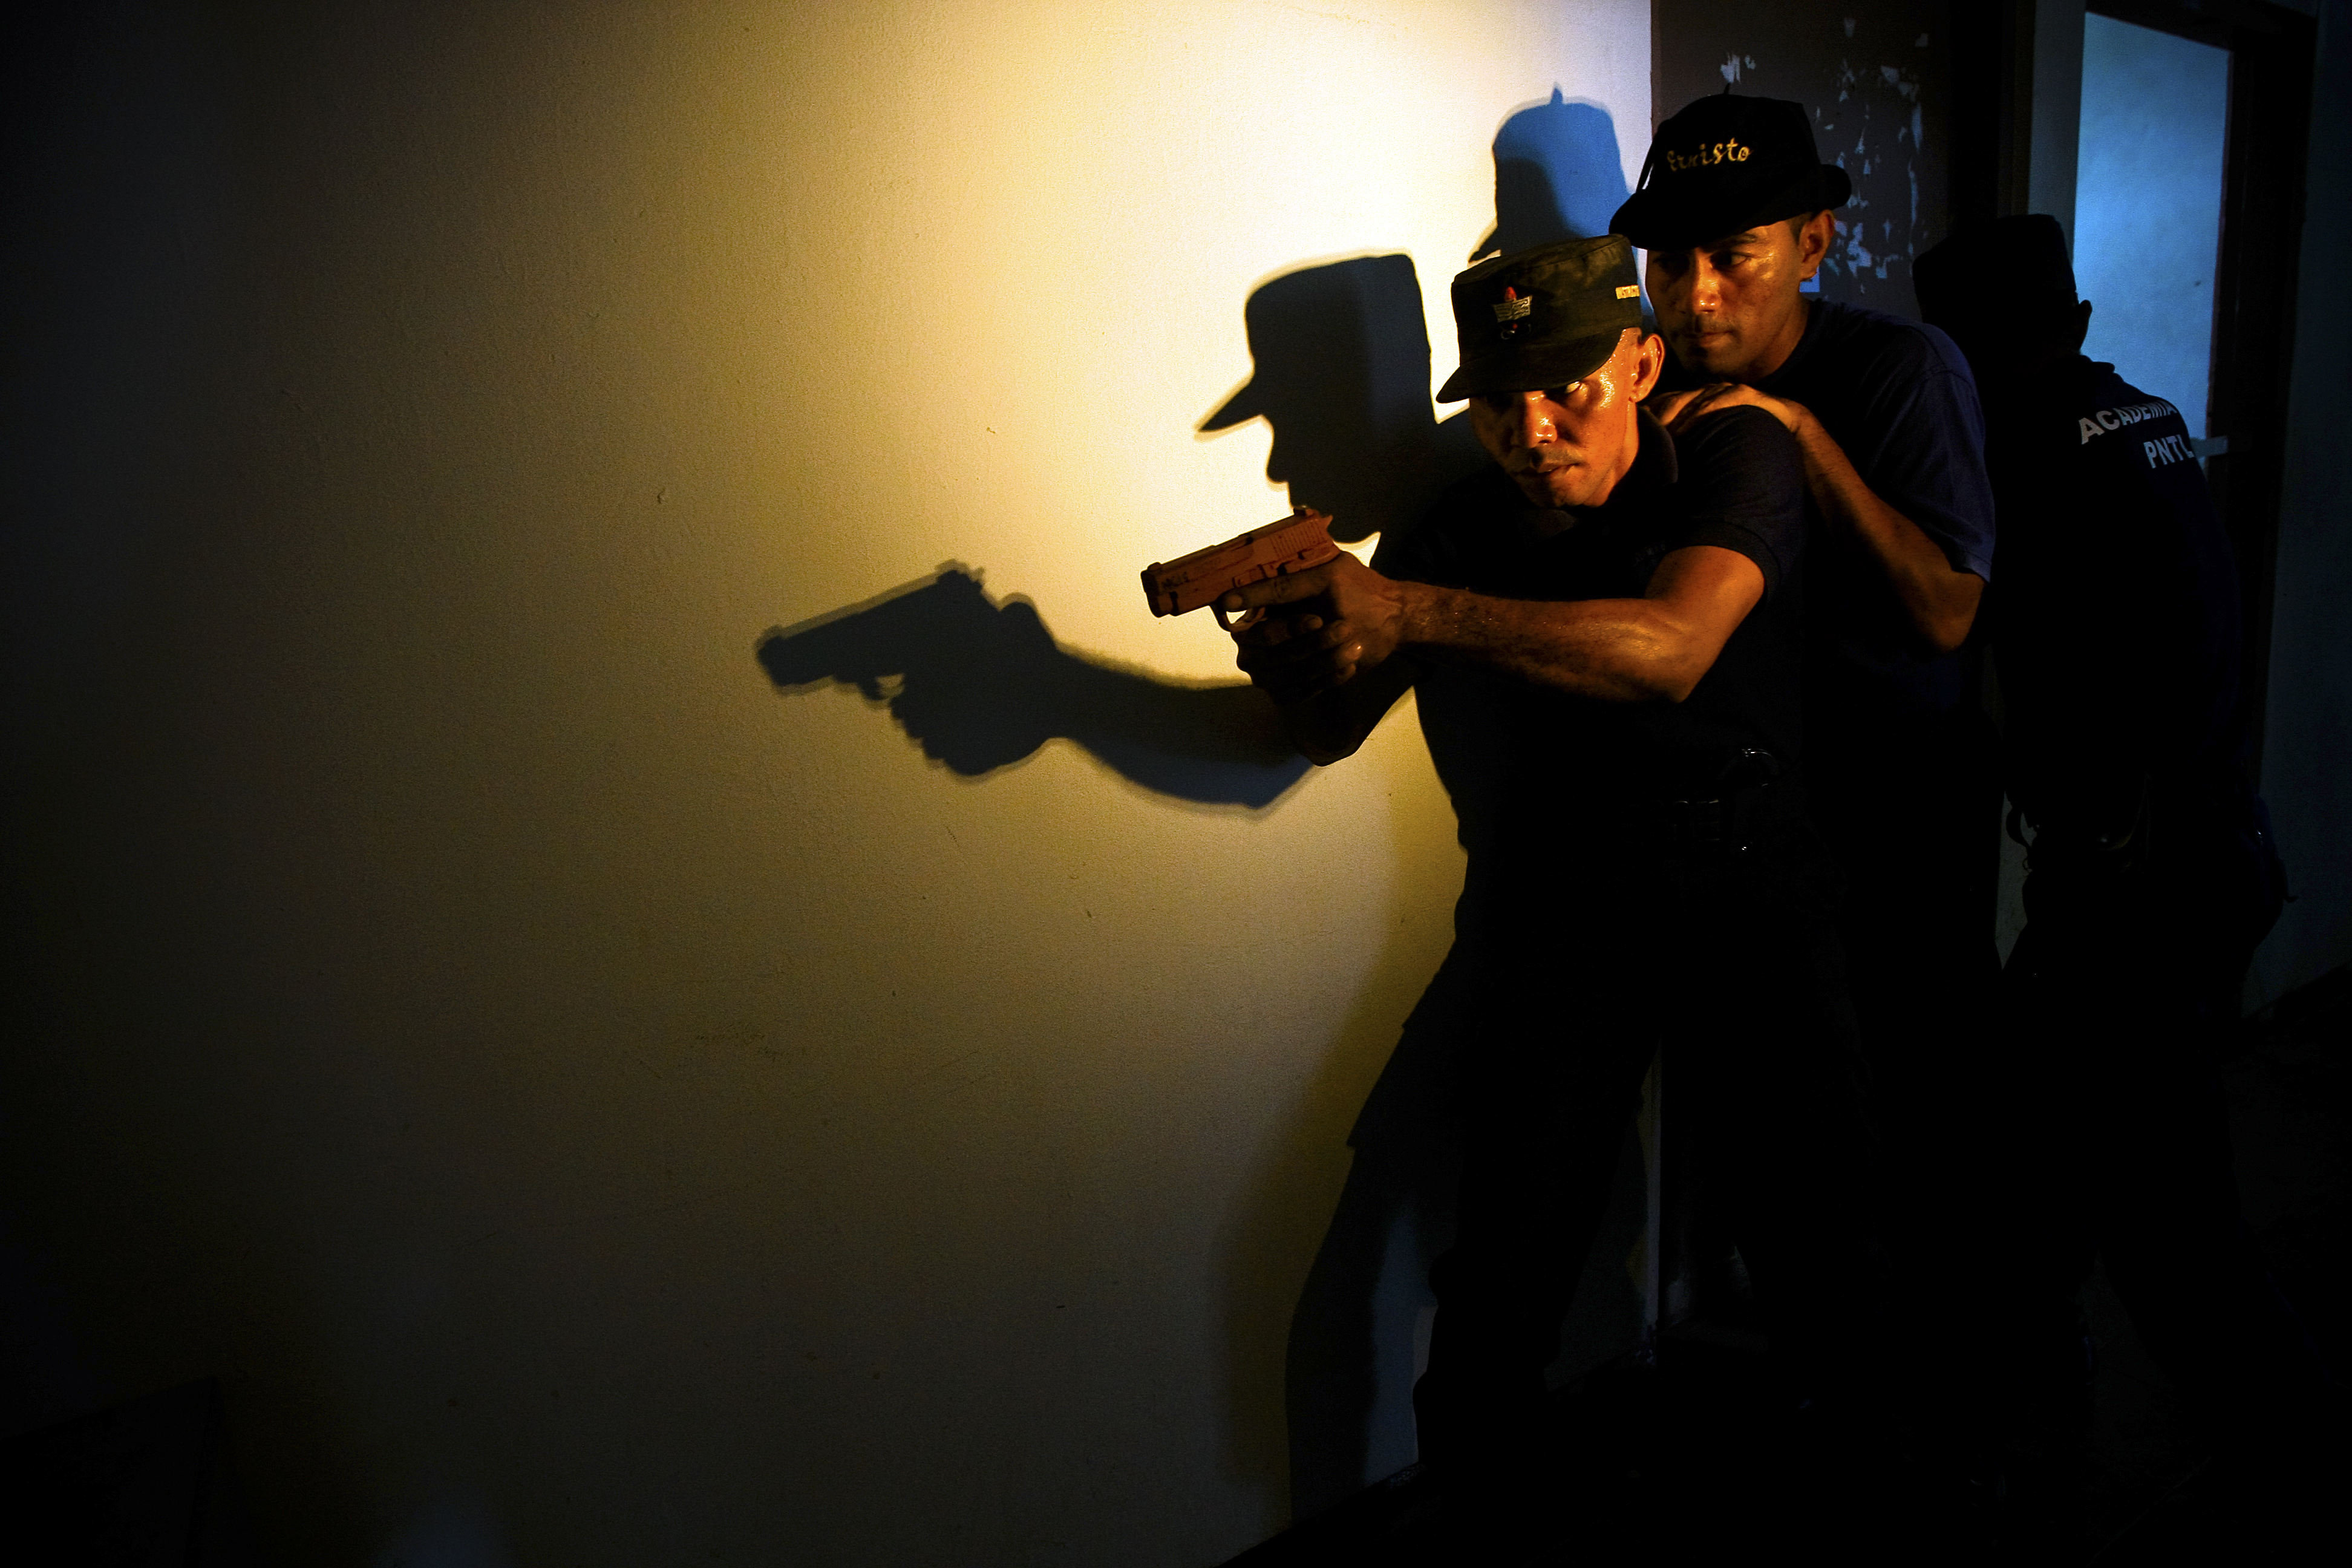 Two security officers are leaning against a wall in a dark interior, one of them holds a gun.